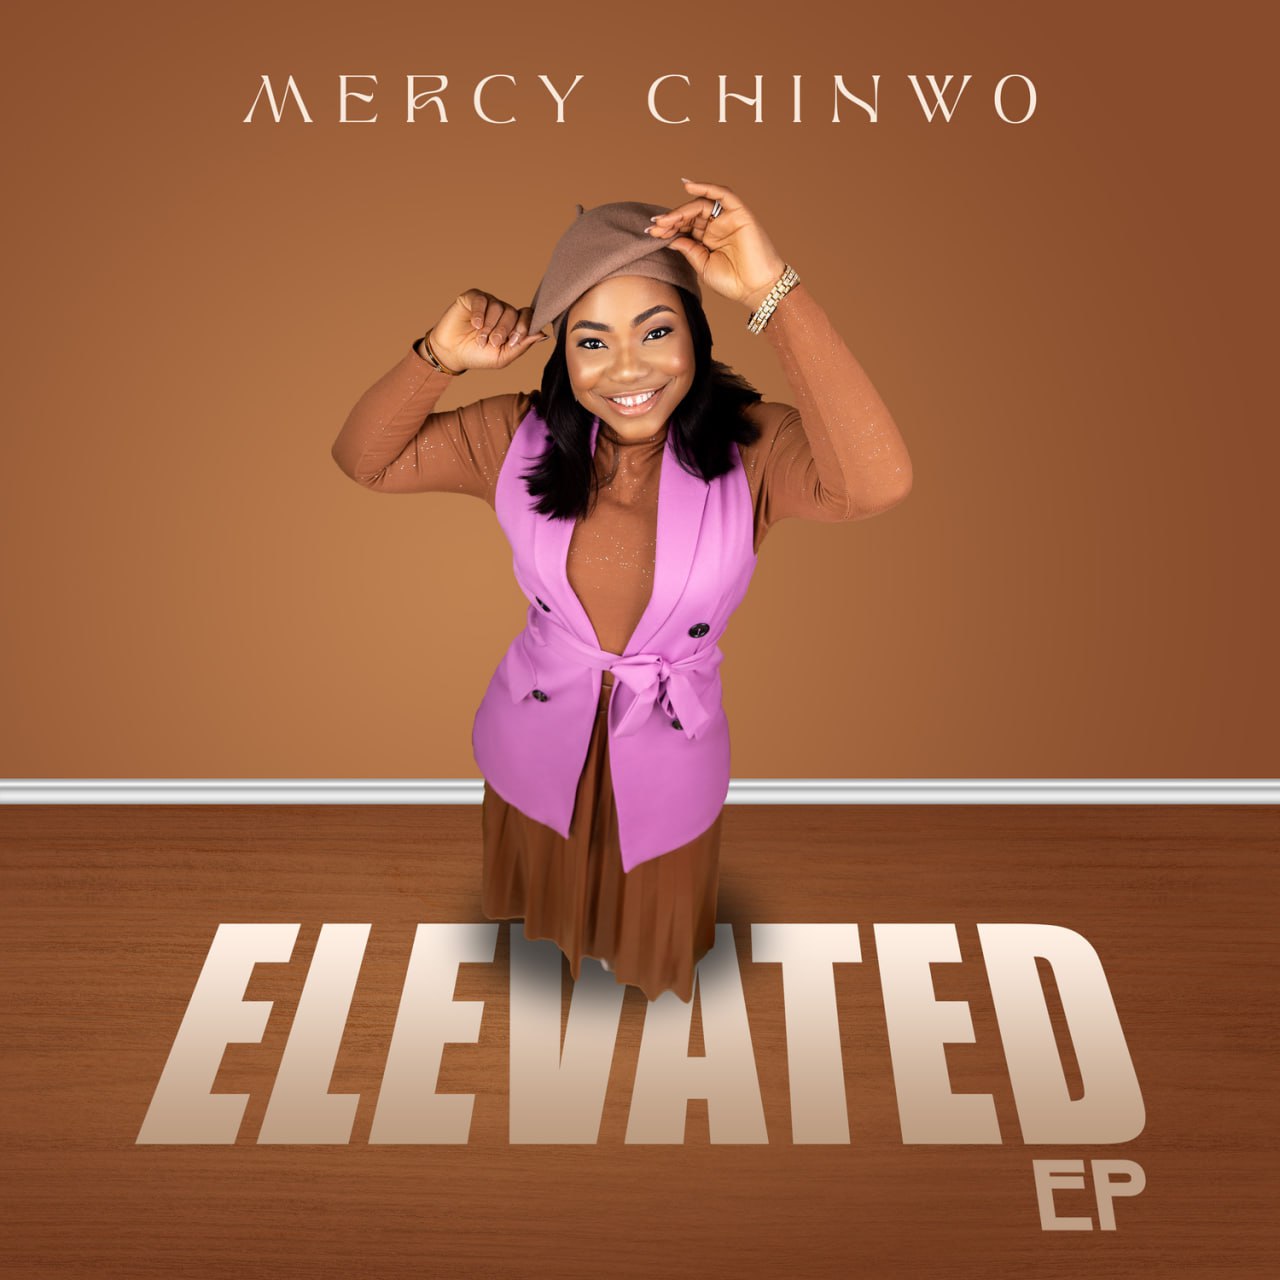 Yesterday Today Forever - Mercy Chinwo